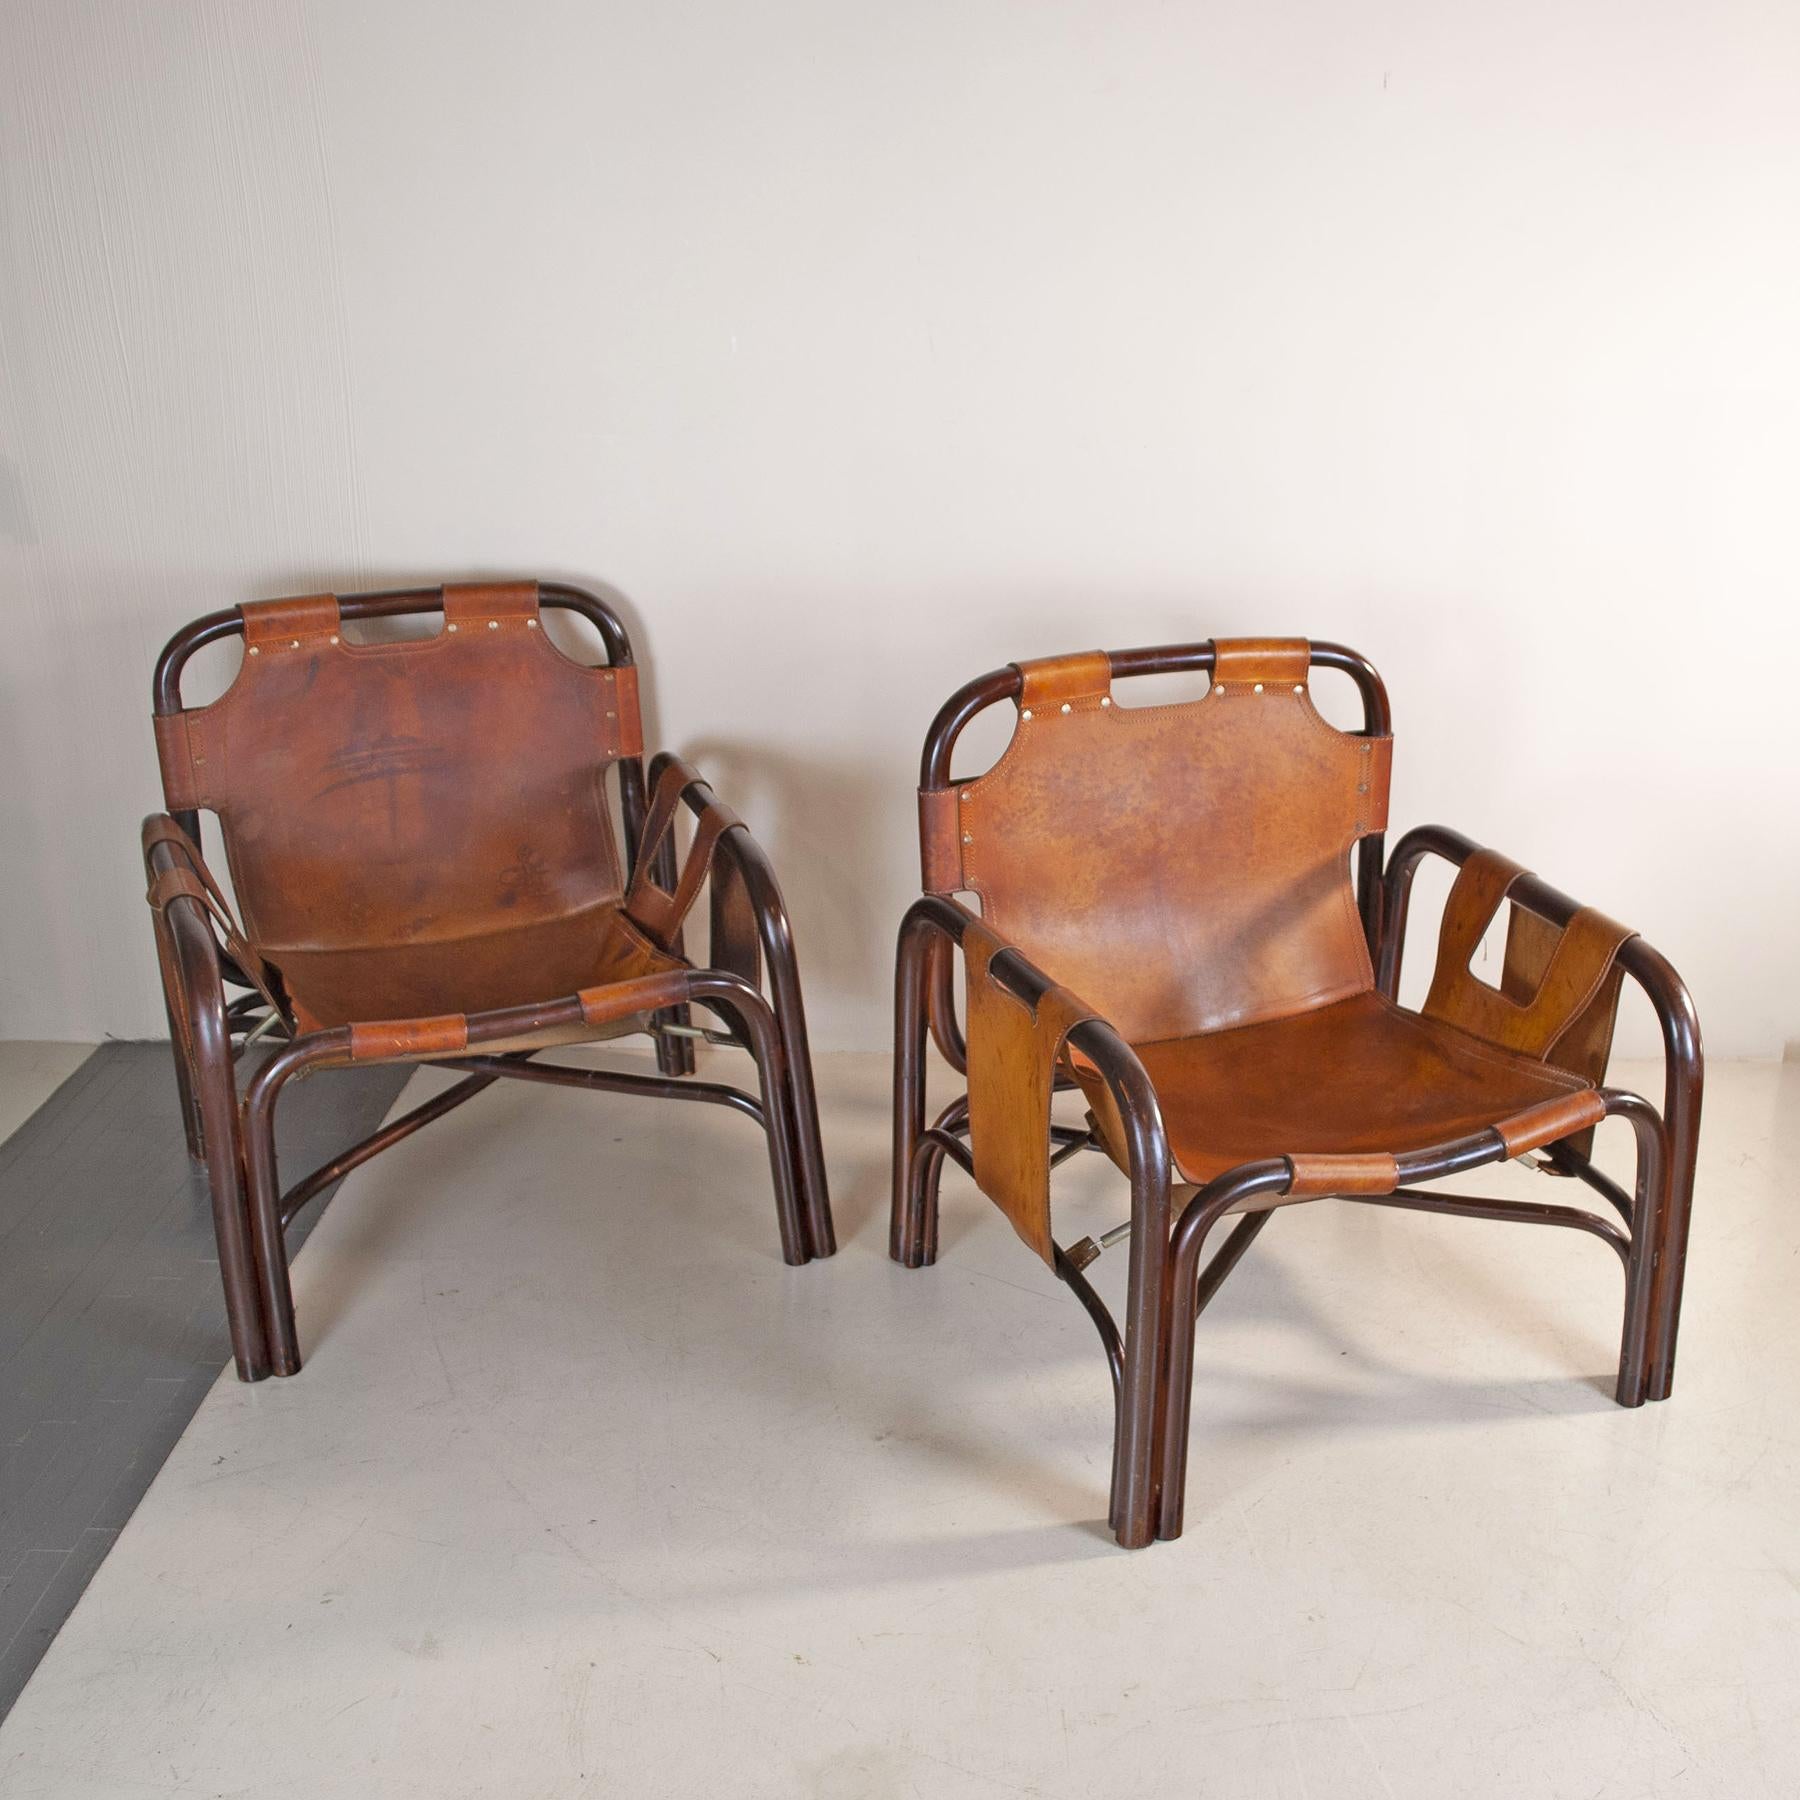 Set of two Armchairs designed by Tito Agnoli for Bonacina late 1960s. Bamboo frame and natural cognac-colored Leather upholstery. Some stains on the leather